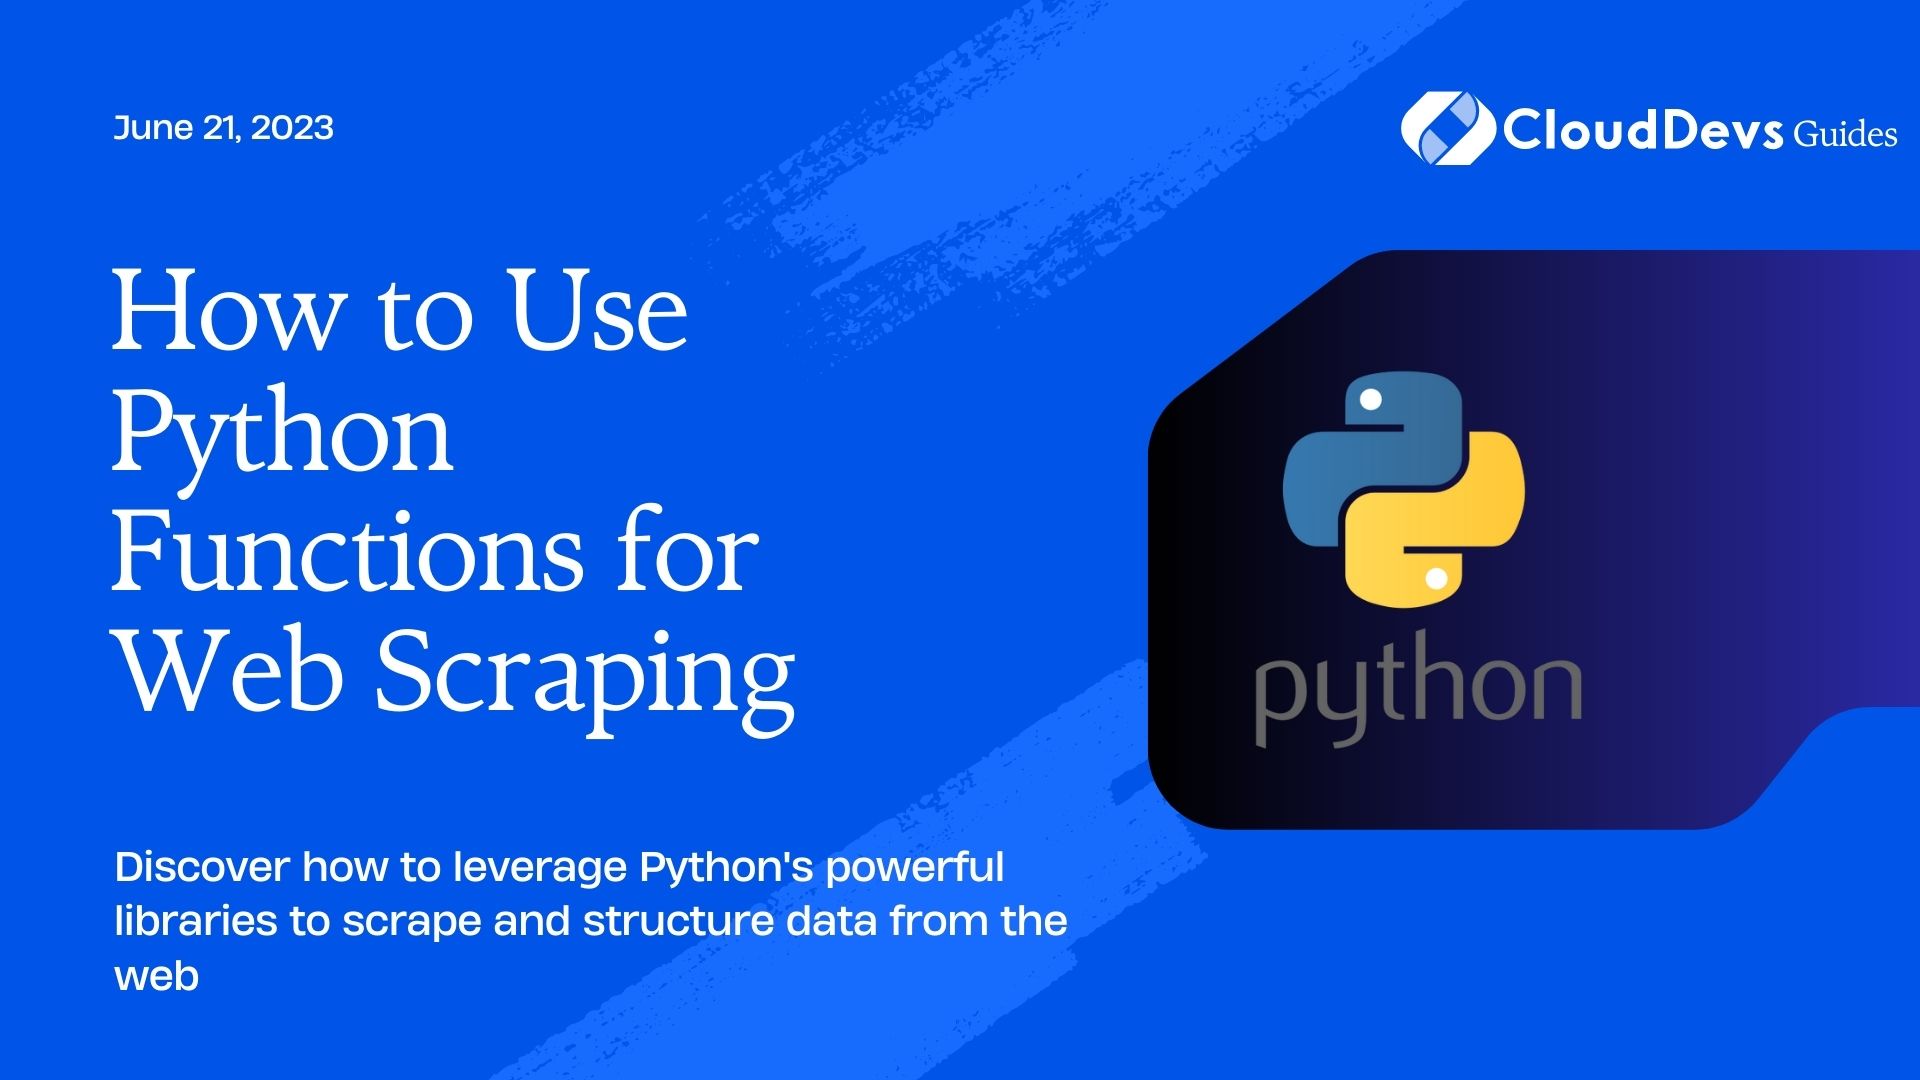 How to Use Python Functions for Web Scraping